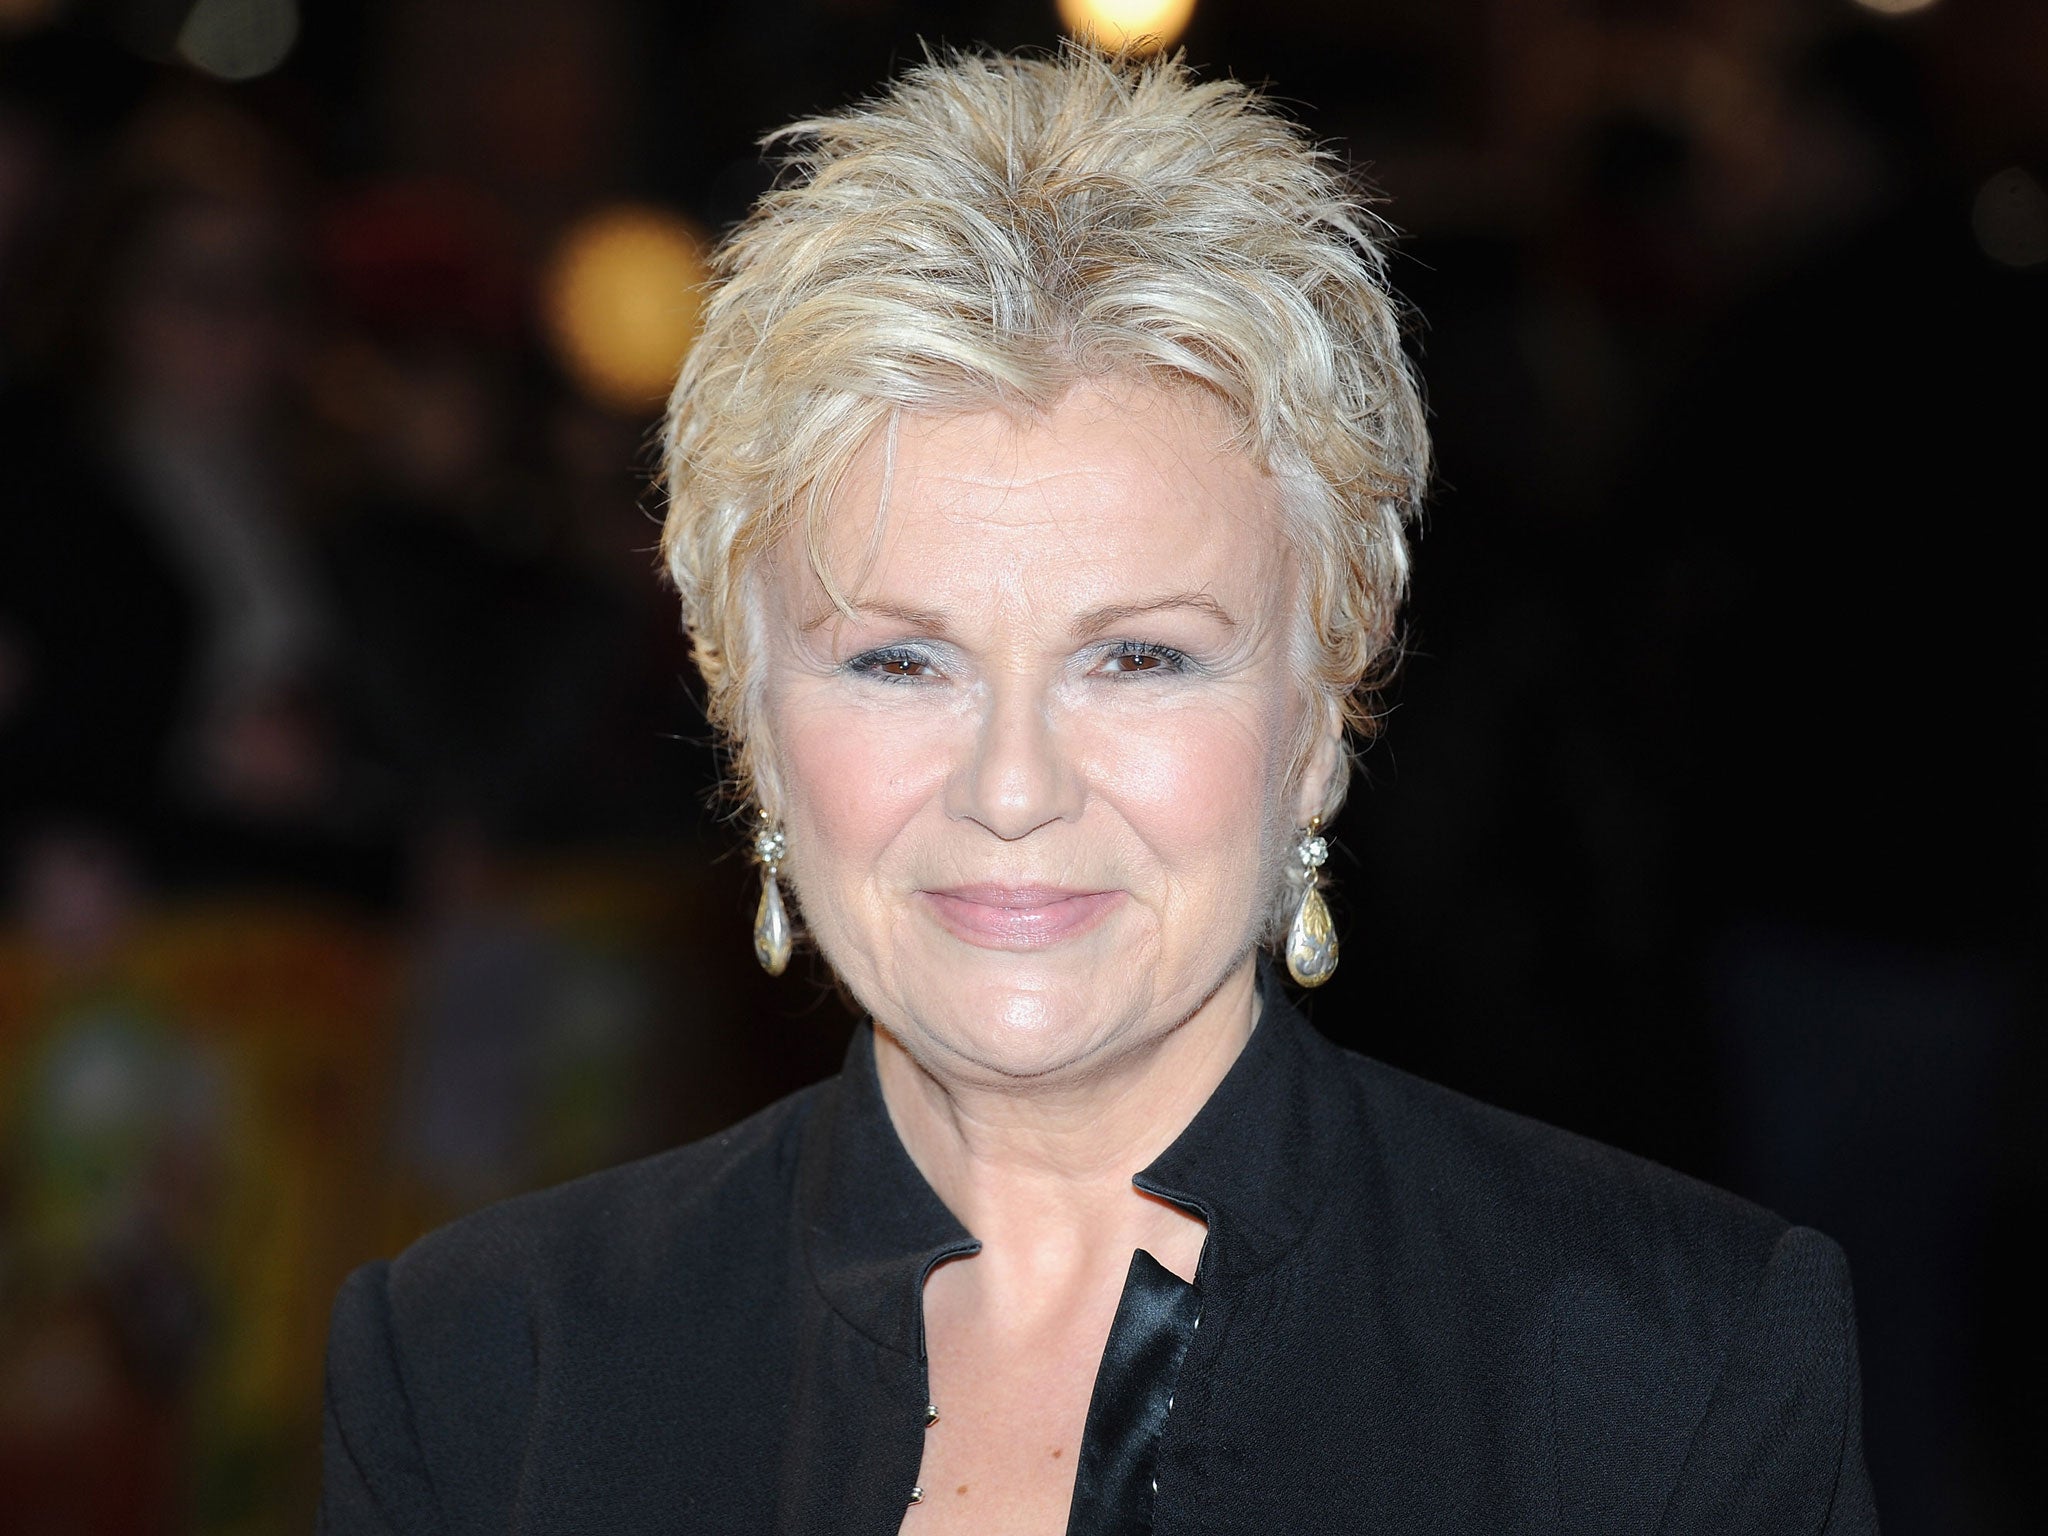 Julie Walters will play a widowed expat living in the Himalayan foothills